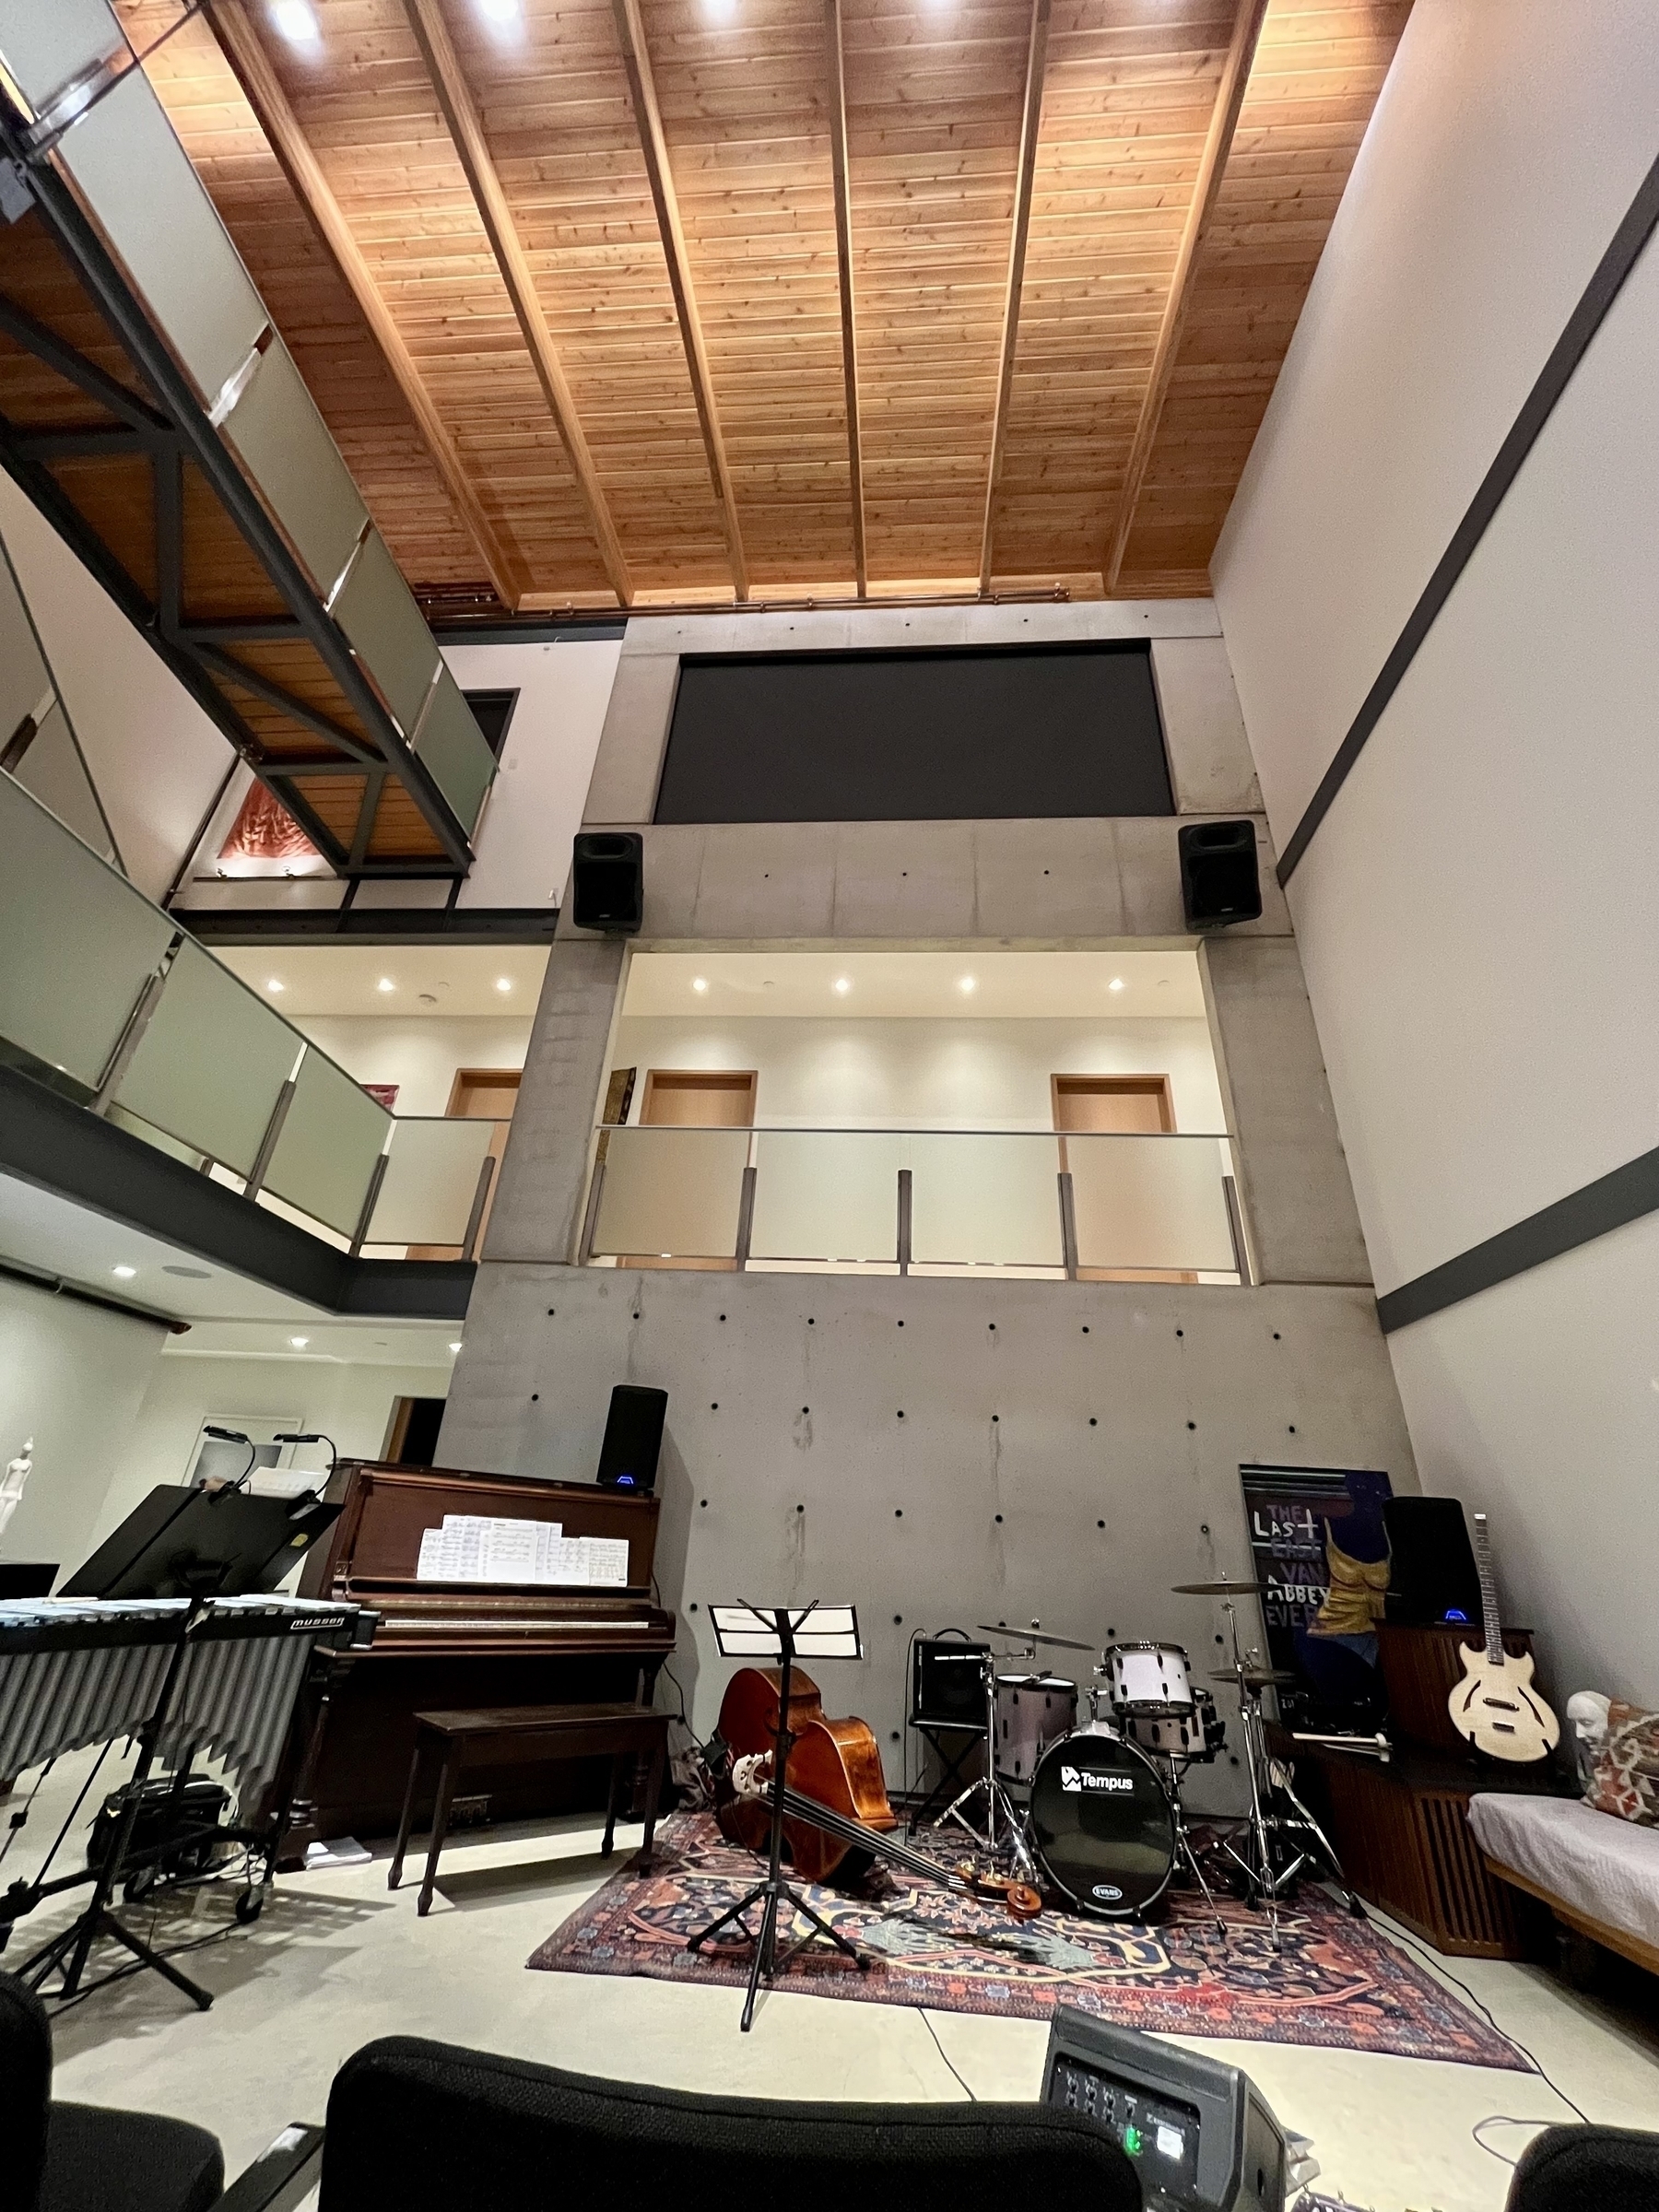 Wide angle of a music stage setup with a unique concrete and wood high ceilinged space 